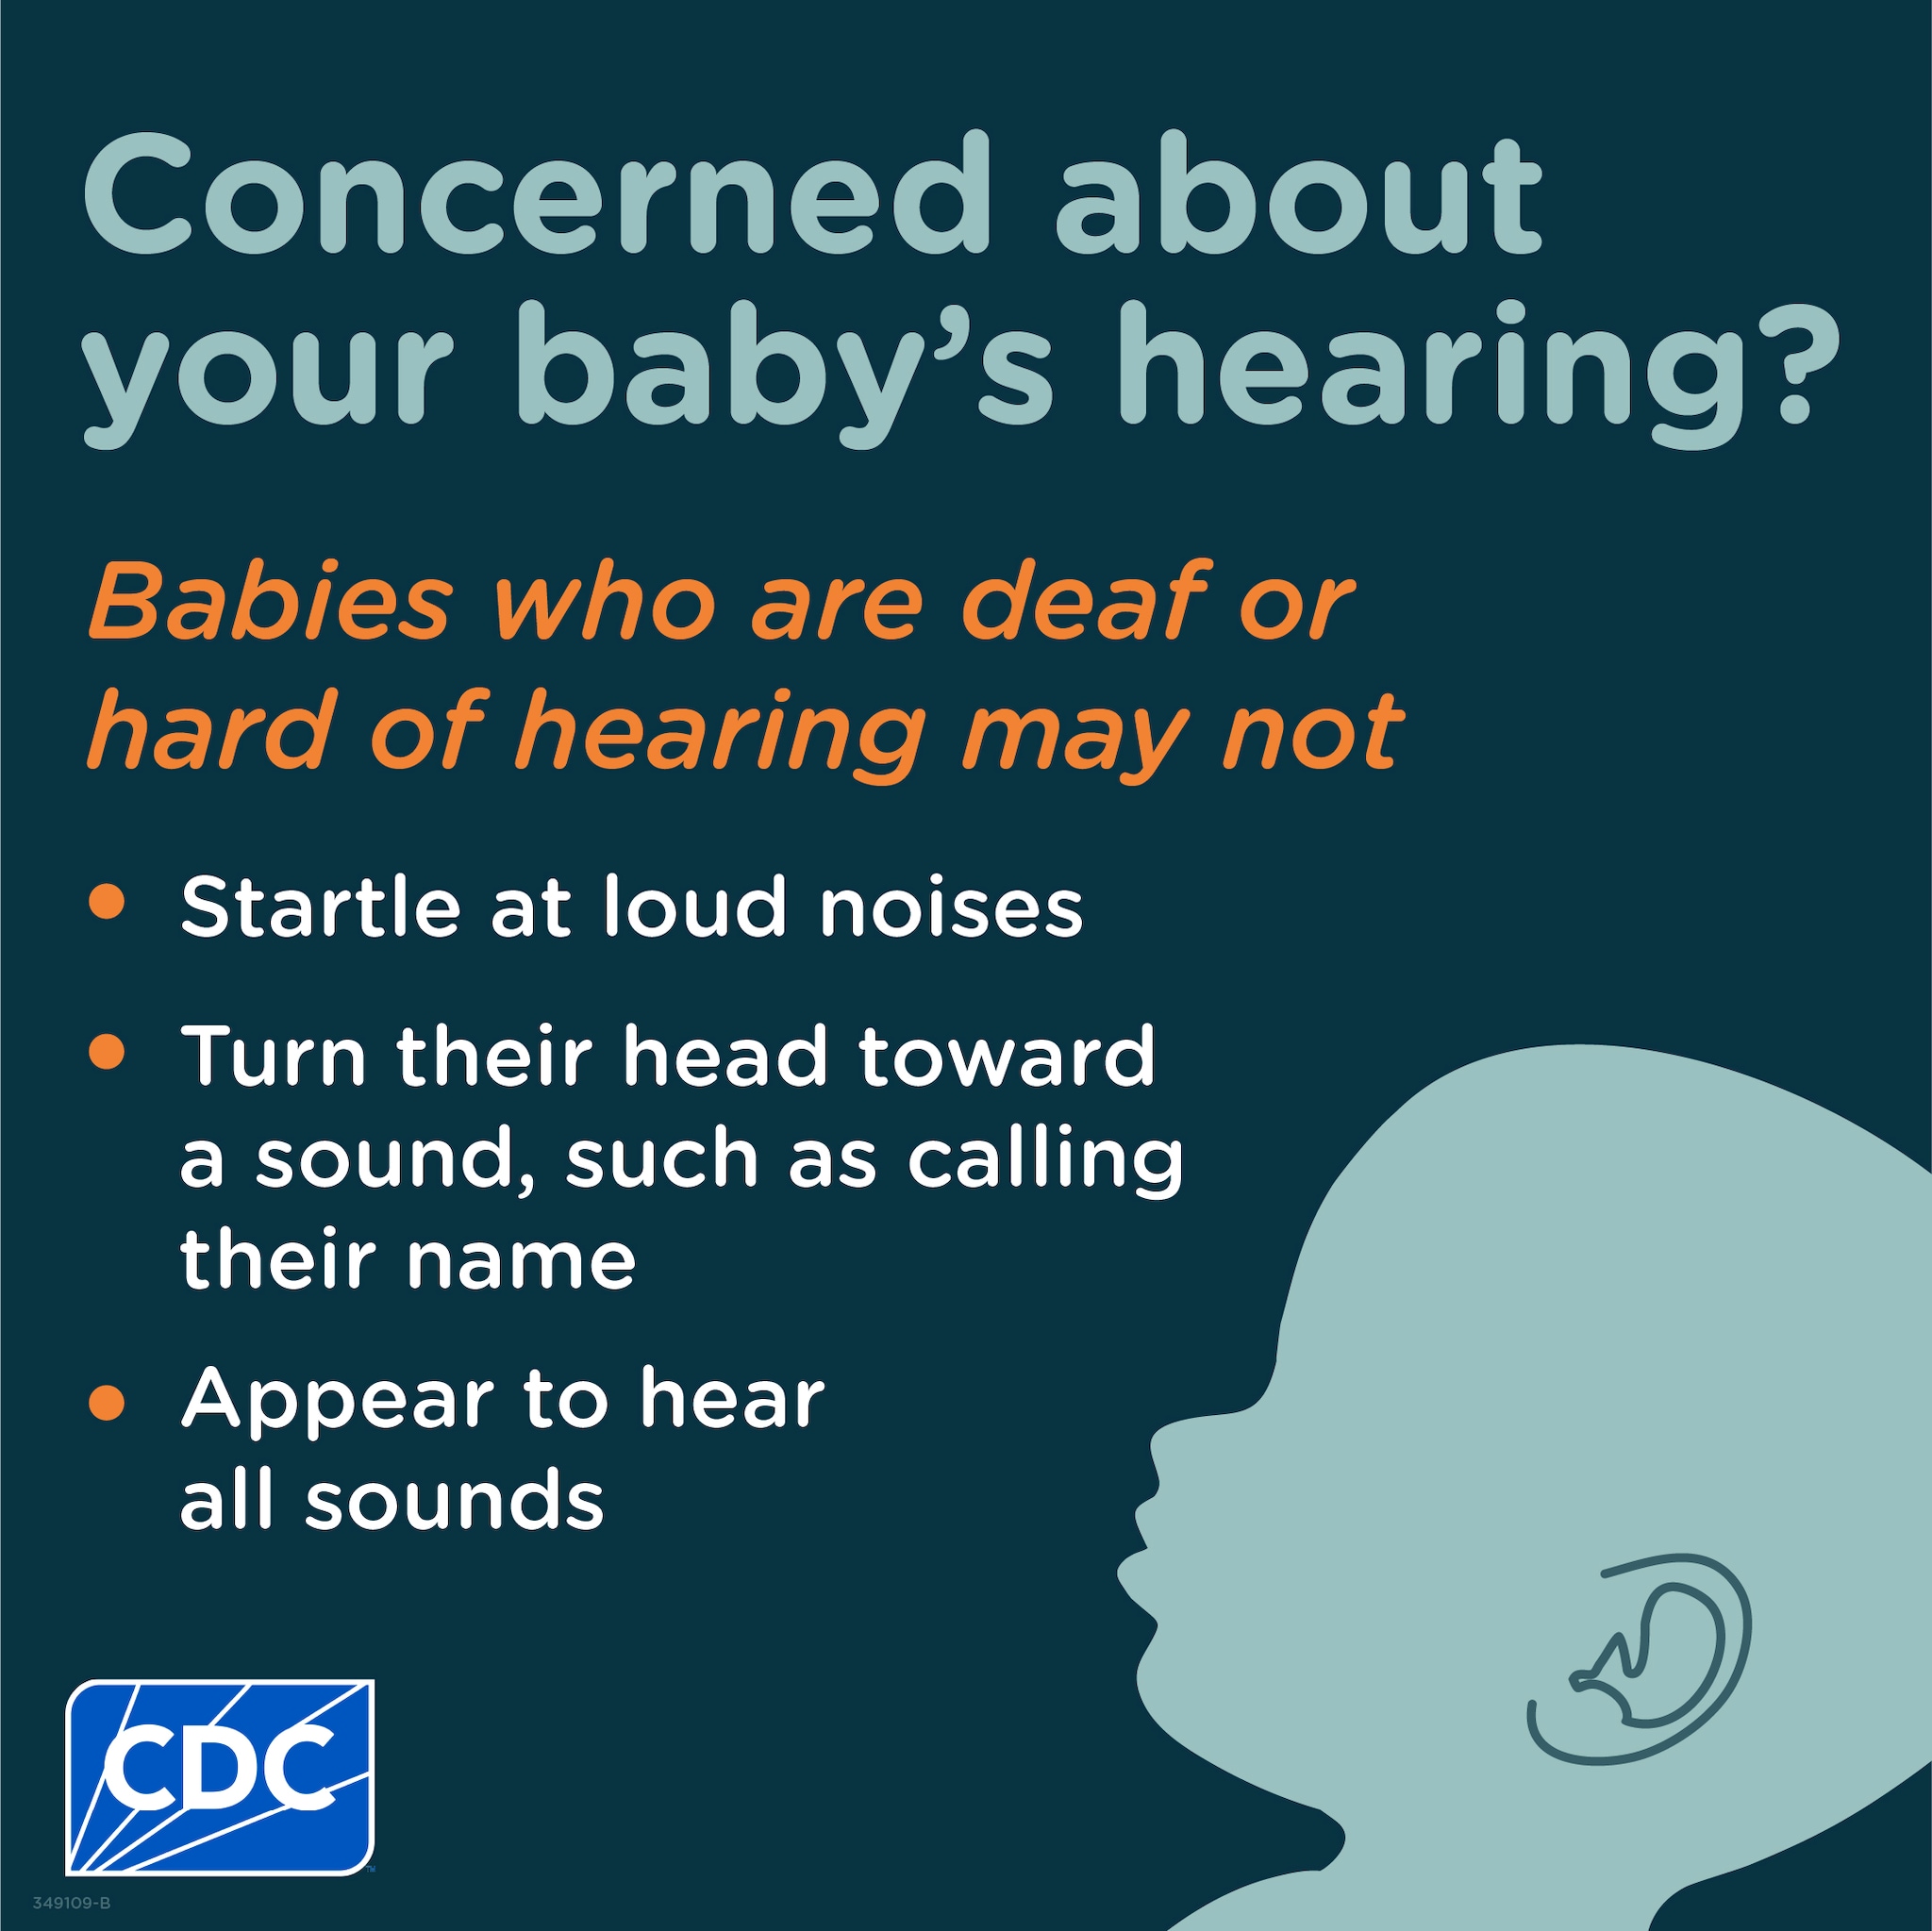 Illustration of a baby with their head turned. Text says that babies who are deaf or hard of hearing may not startle at loud noises, turn their head toward a sound, or appear to hear all sounds.